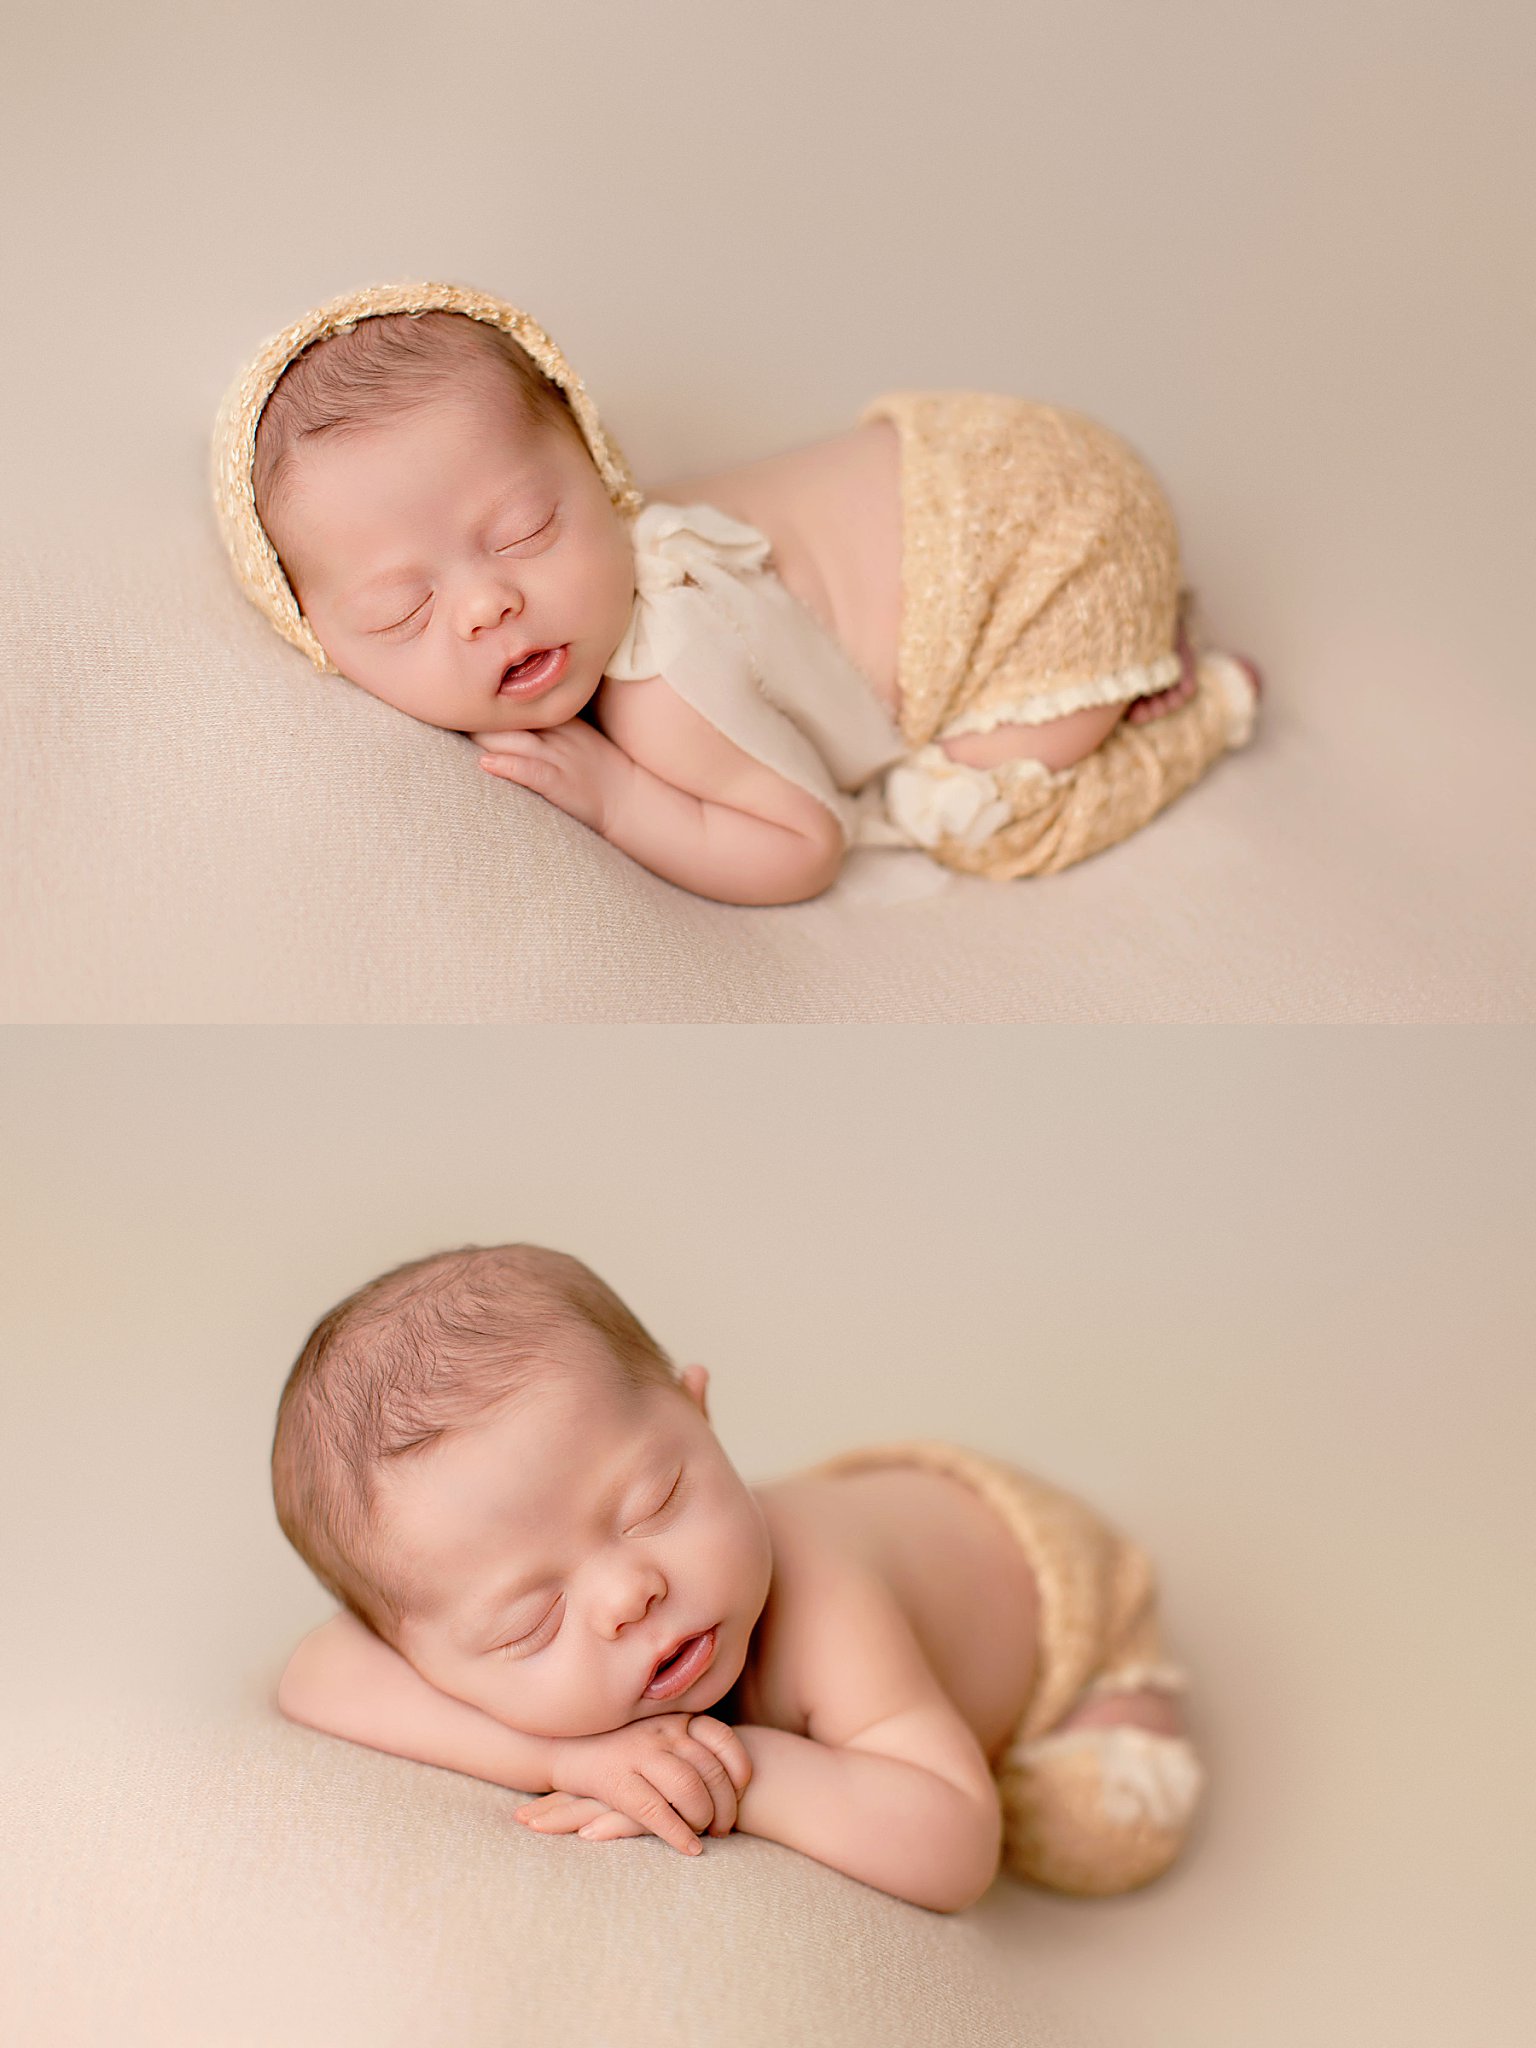 baby girl sleeps while wearing a bonnet during sweet newborn studio session